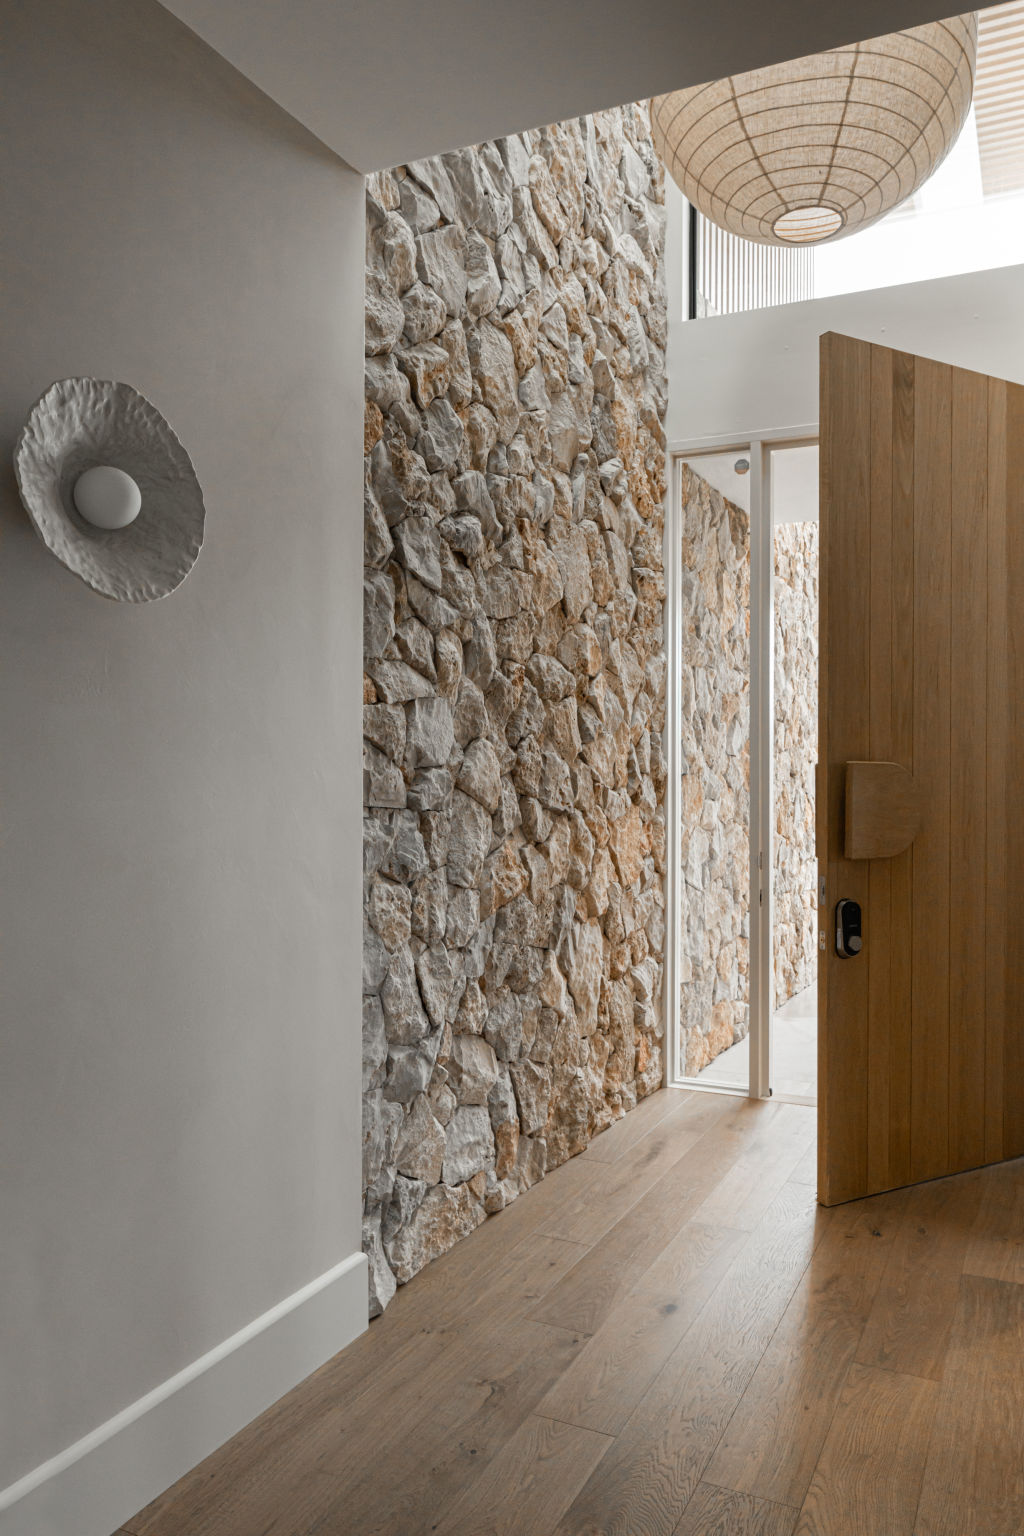 The meticulously placed stone extends all the way up into the entryway void. Photo: Grace Picot